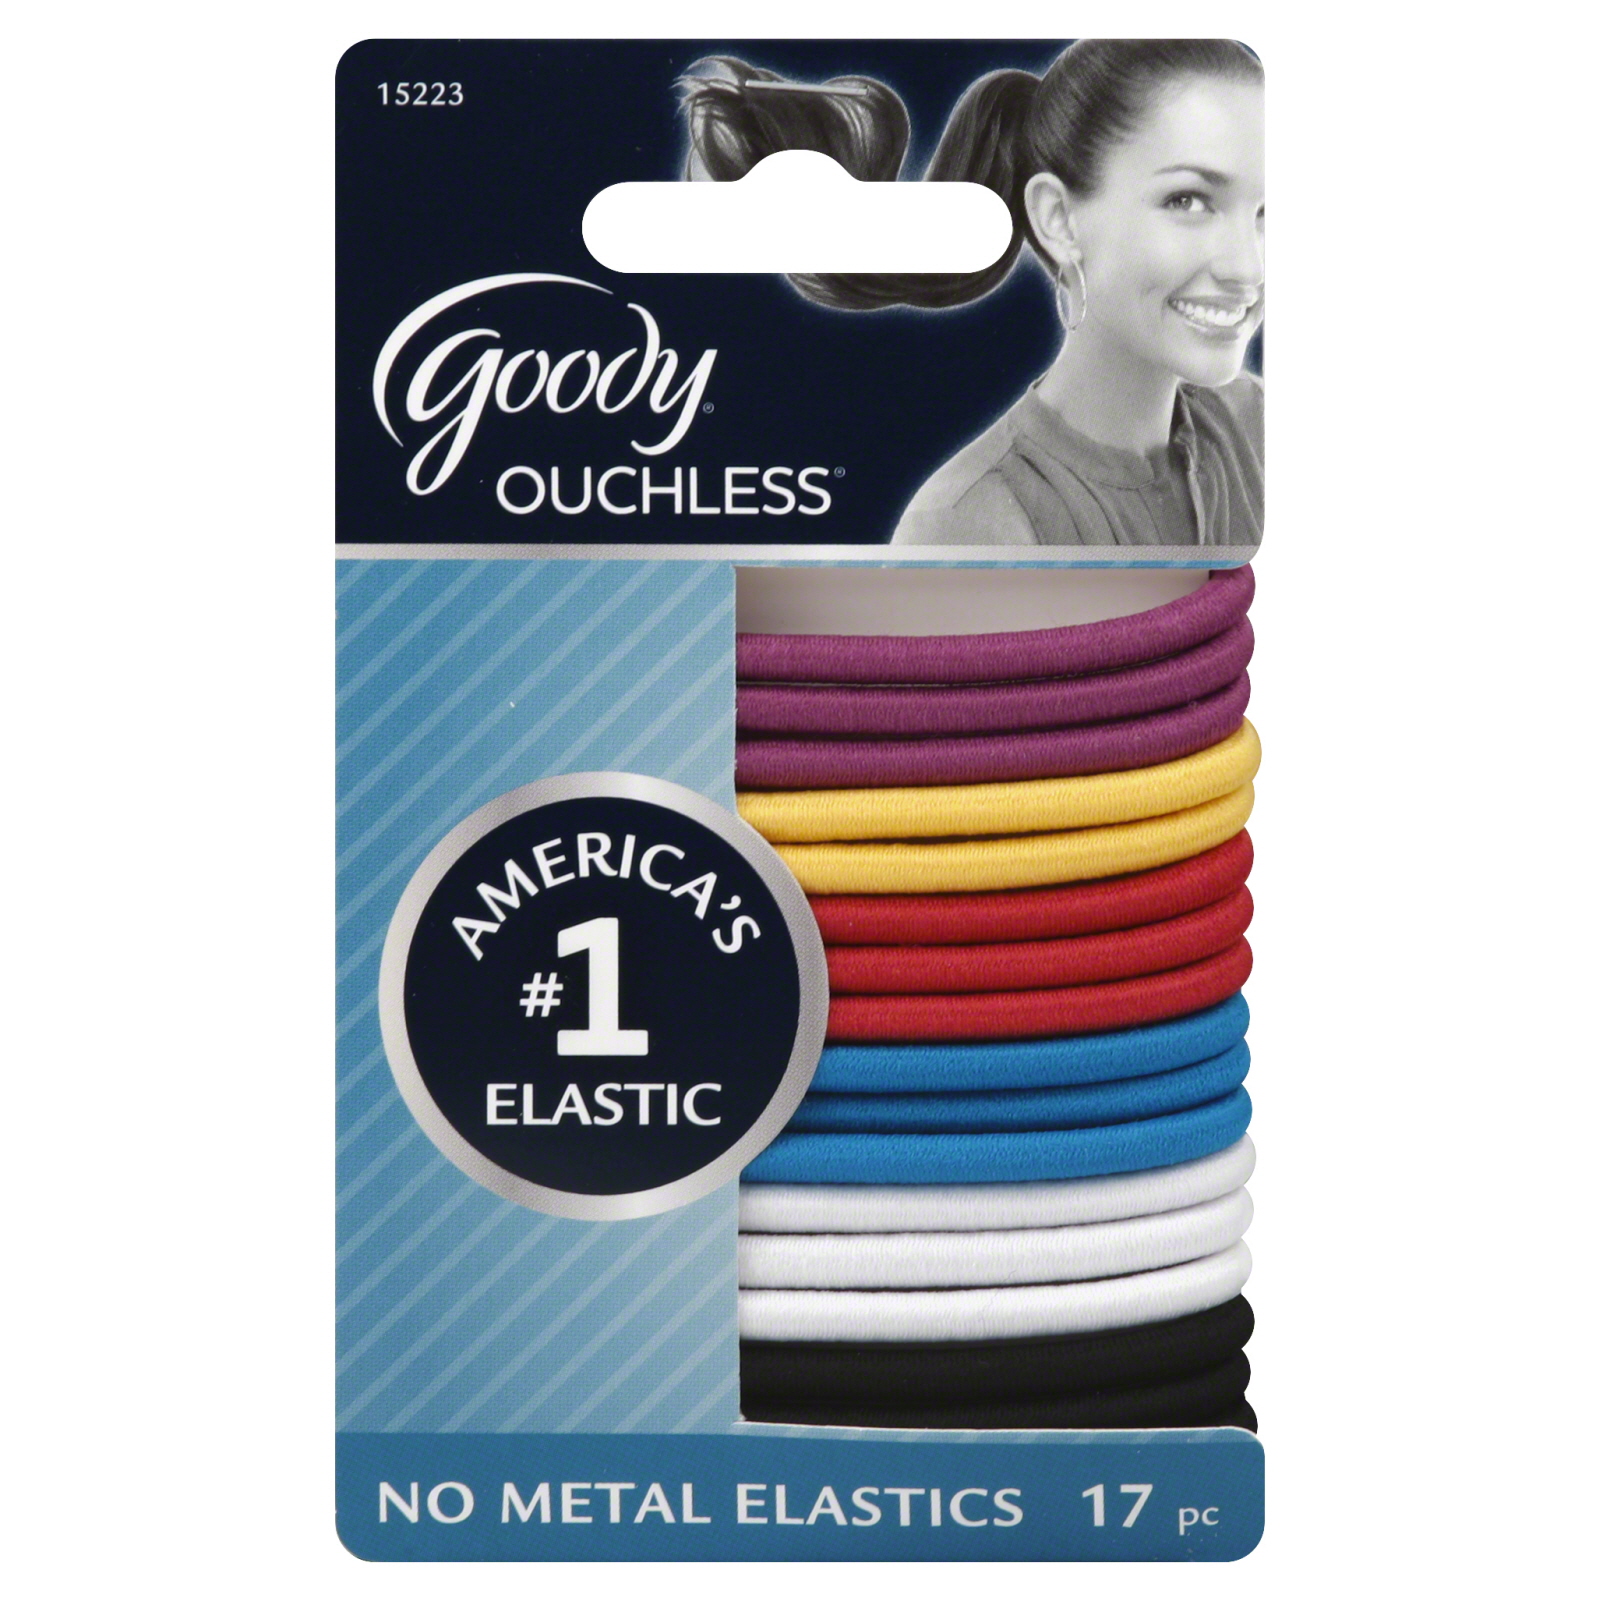 UPC 041457152232 product image for Ouchless 4MM Elastics, Brooke, 17 CT | upcitemdb.com